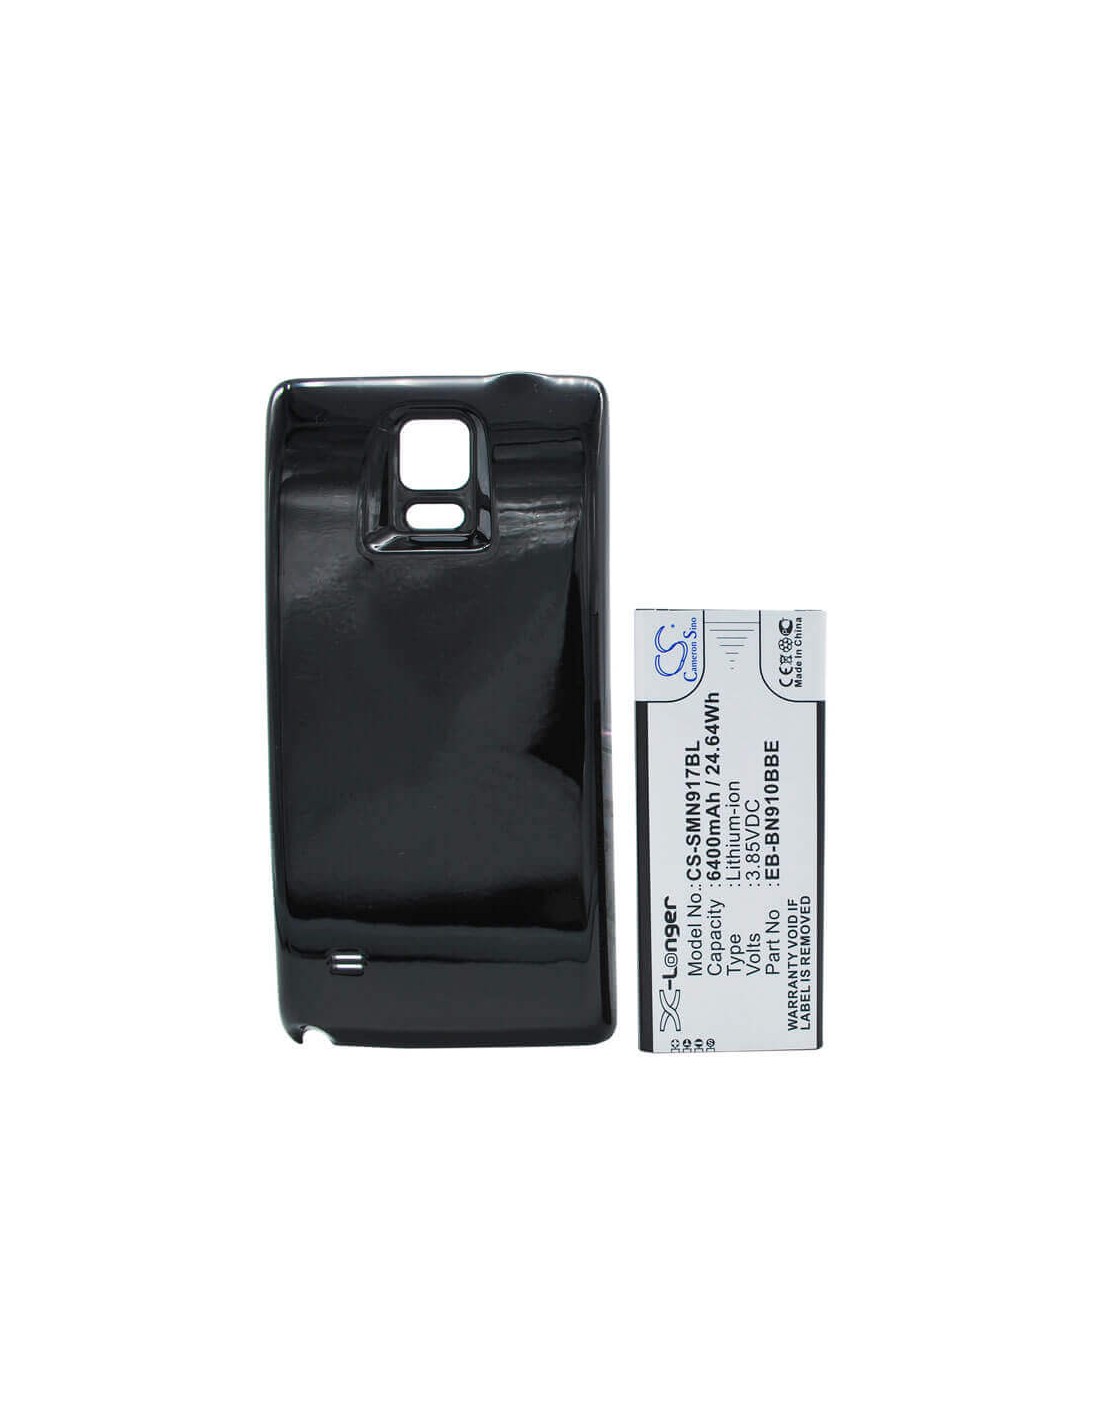 Battery for Samsung Galaxy Note 4, SM-N910W8, SM-N910R4 with black back cover 3.85V, 6400mAh - 24.64Wh